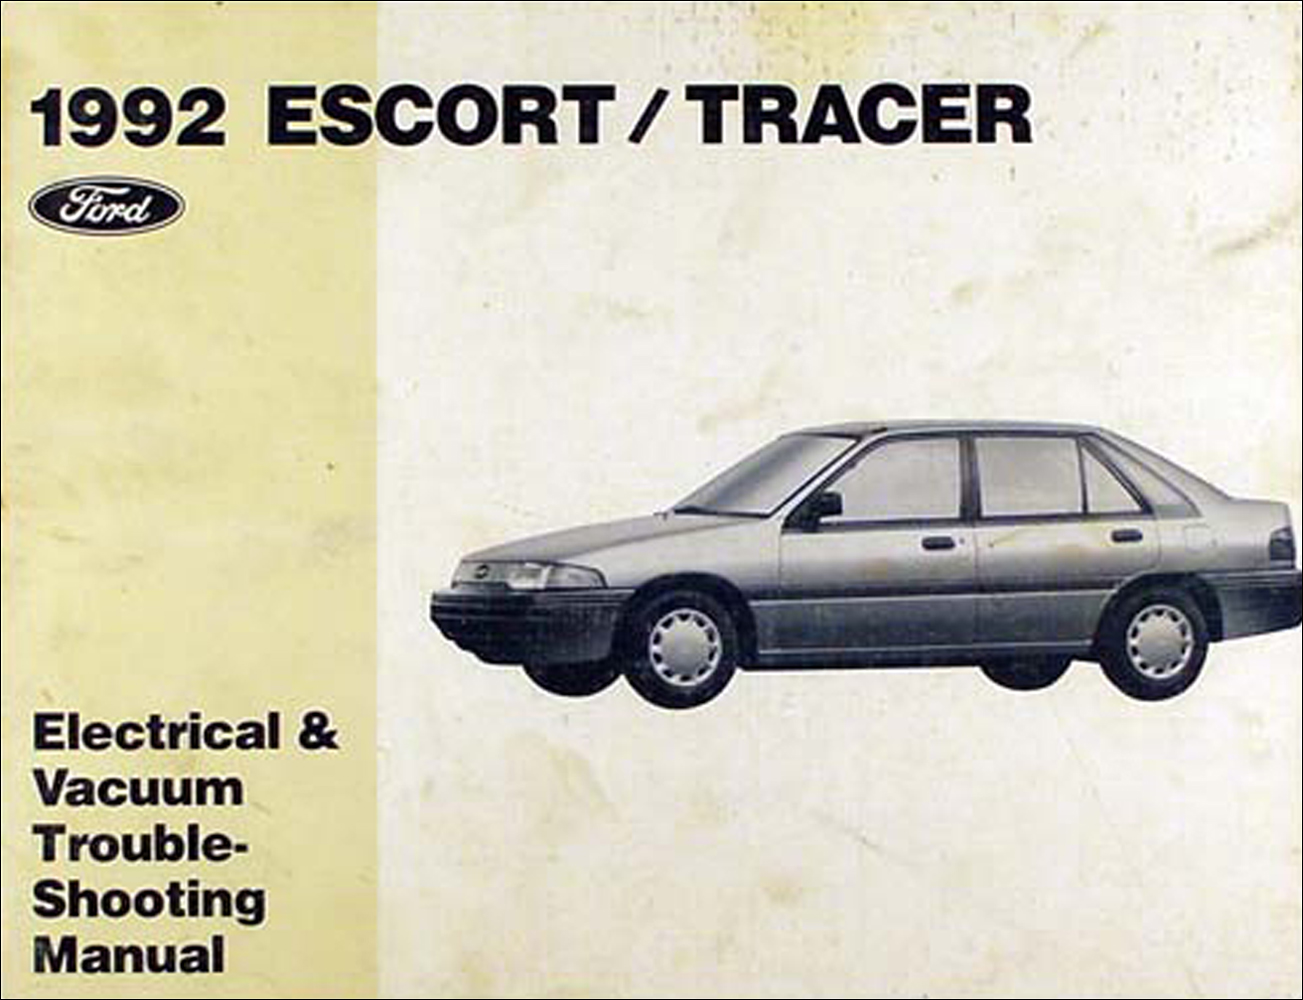 1992 Ford Escort and Mercury Tracer Electrical Troubleshooting Manual